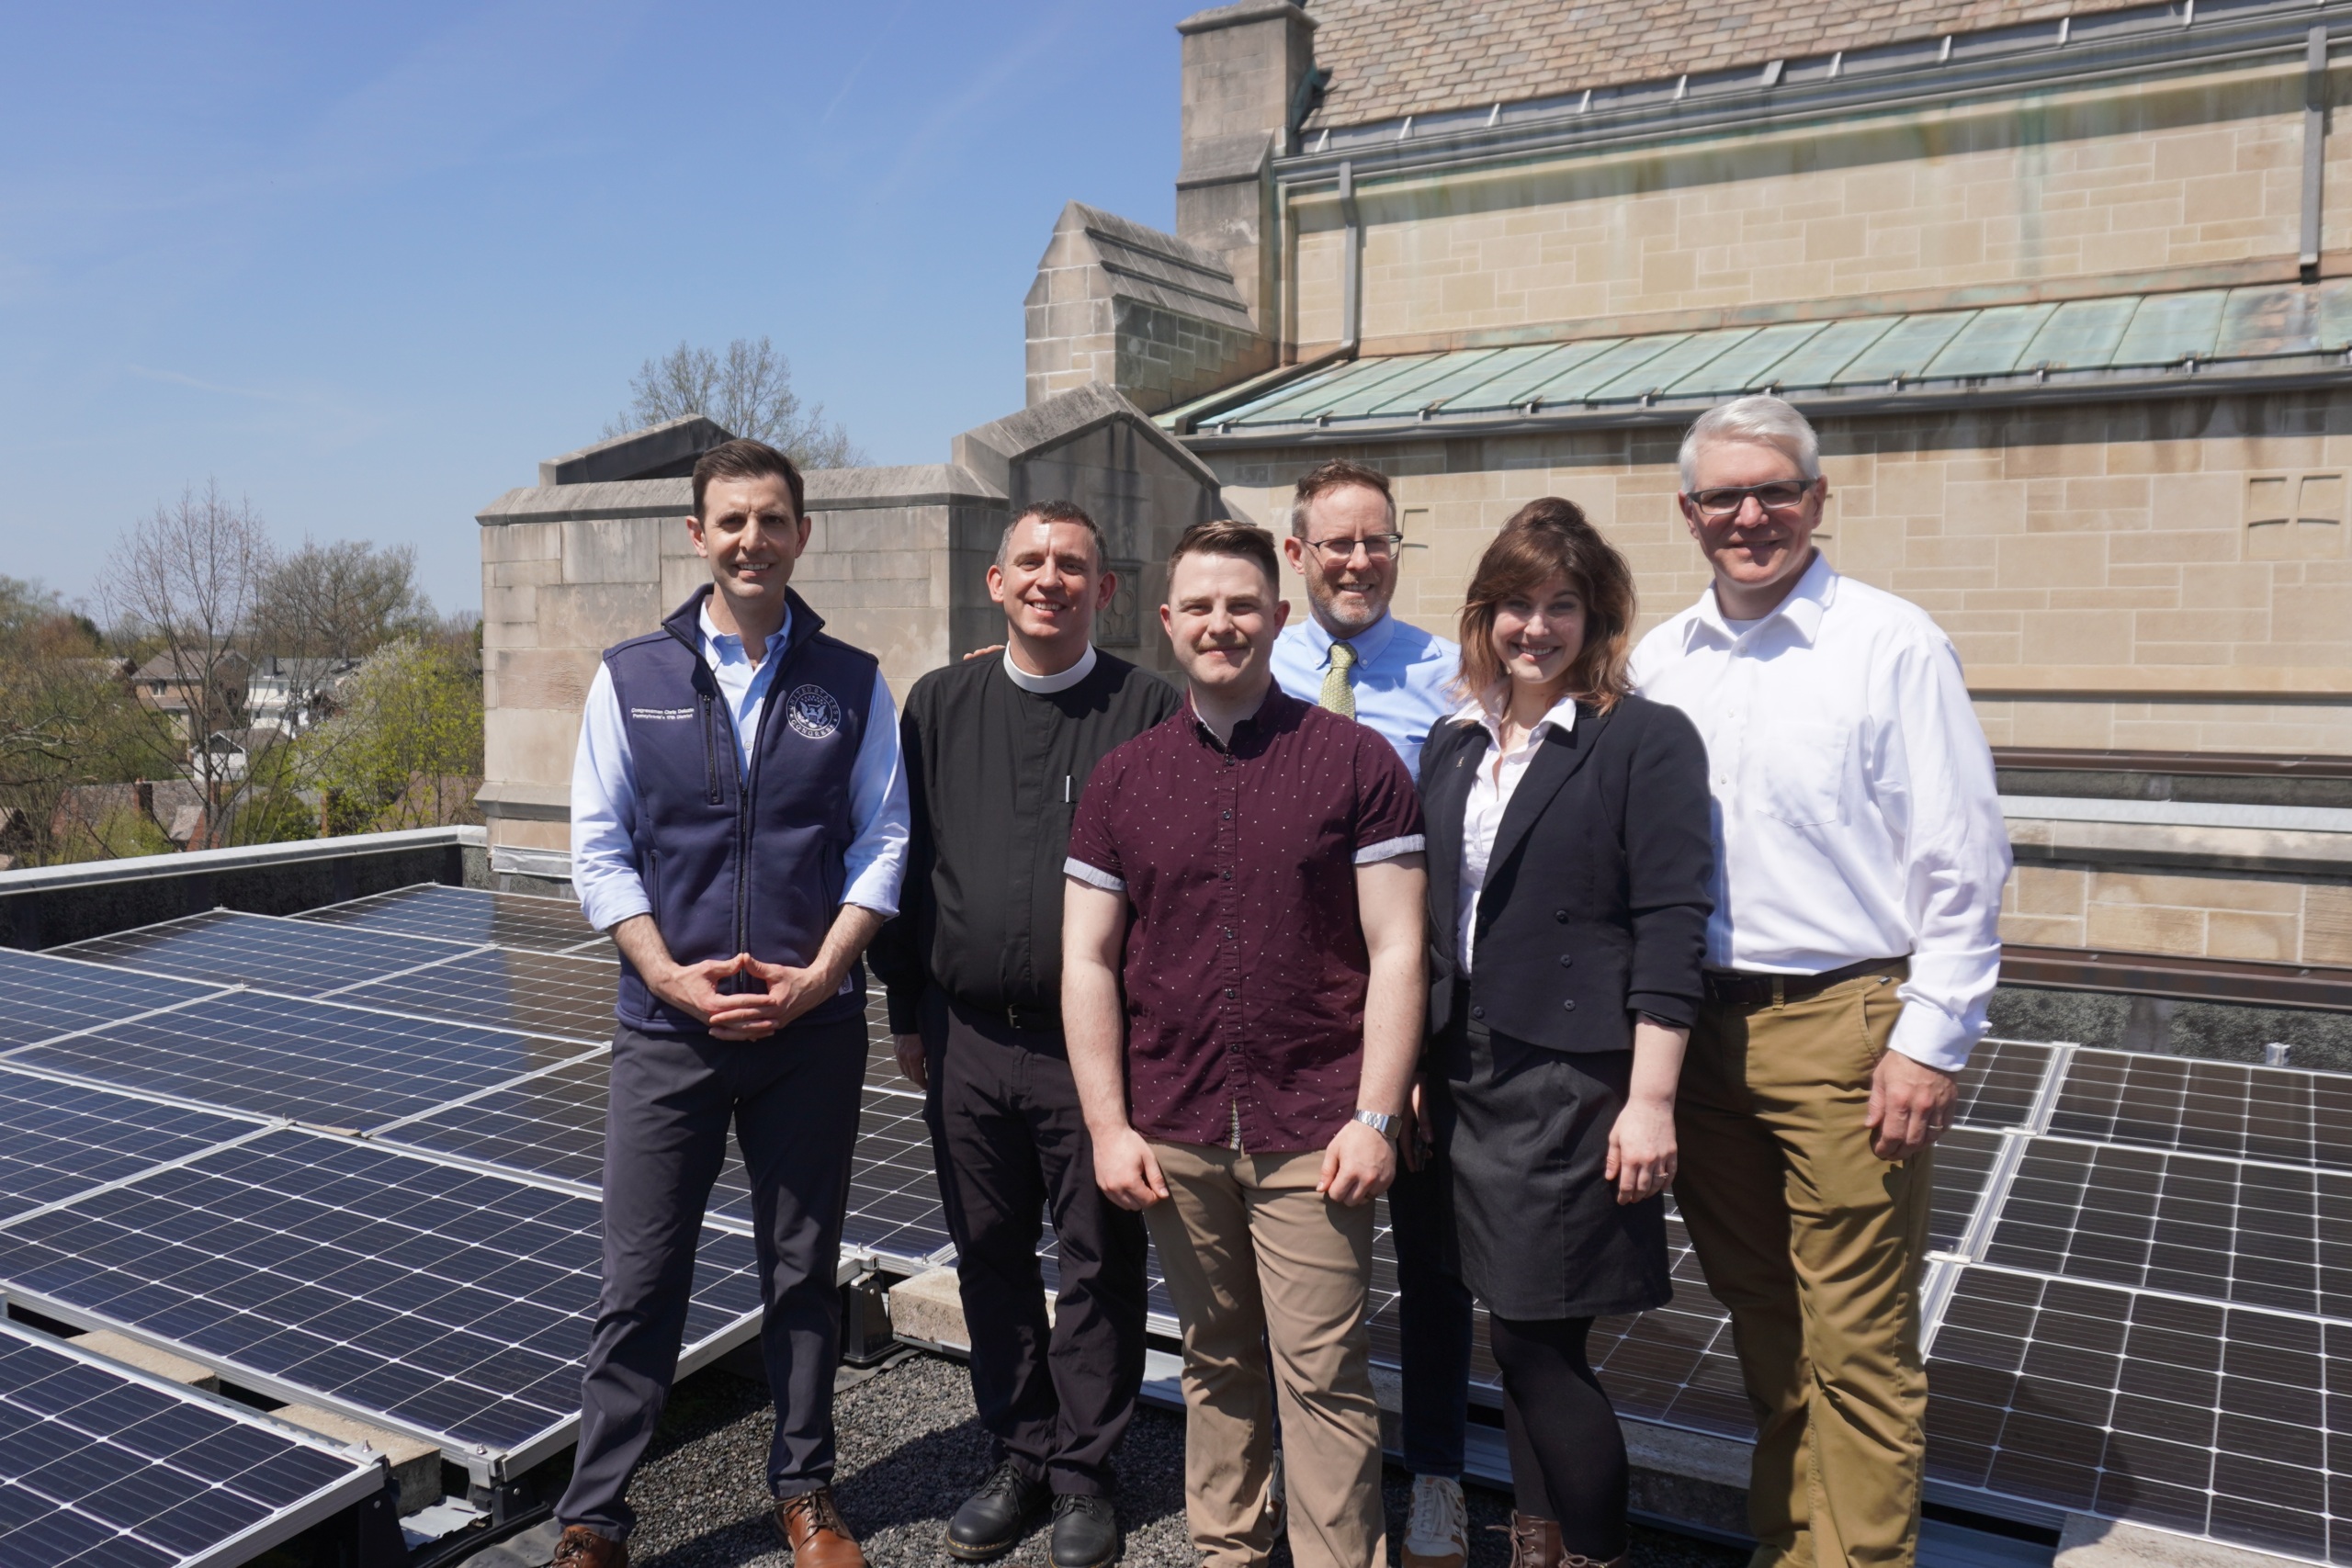 Congressman Deluzio, PennEnvironment, and leaders from St. Pauls gather around solar panels on the roof of a church